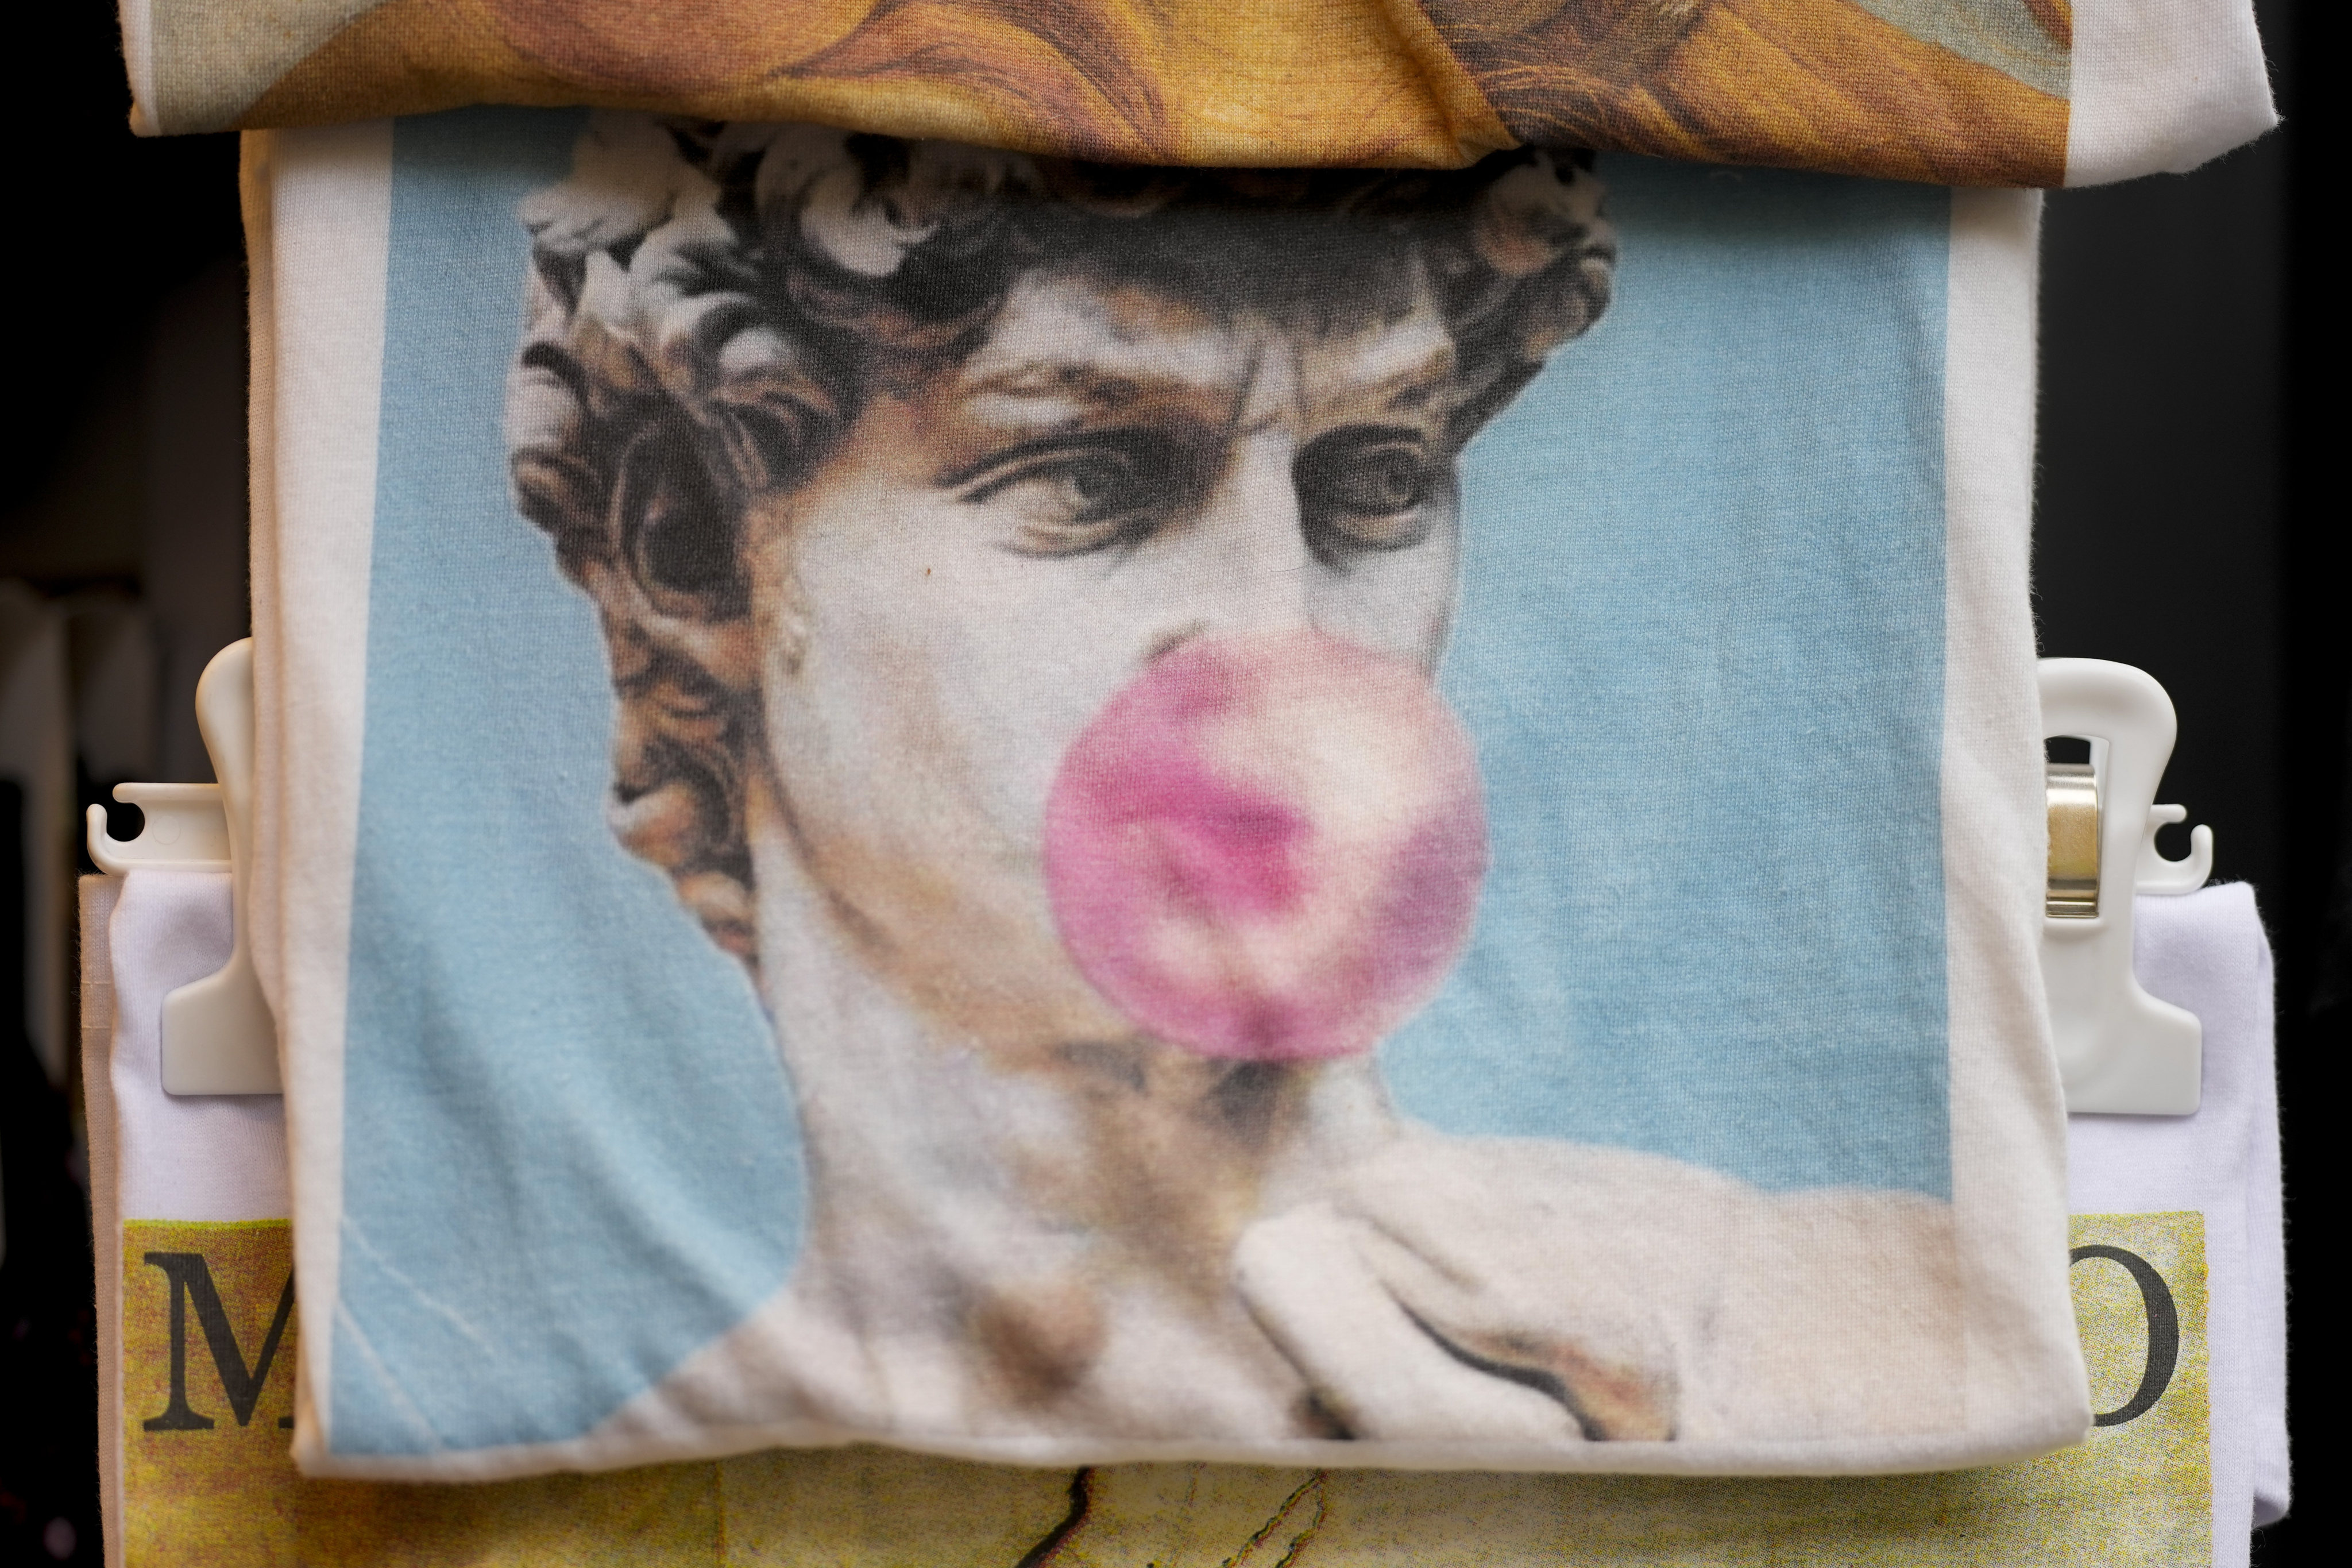 A souvenir bag shows Michelangelo’s David blowing a gum bubble among other souvenirs in a shop in Florence, Italy, on March 18, 2024. Legal efforts to restrict vendors from debasing the statue’s image have prompted debate across Italy about restrictions on freedom of expression. Photo: AP